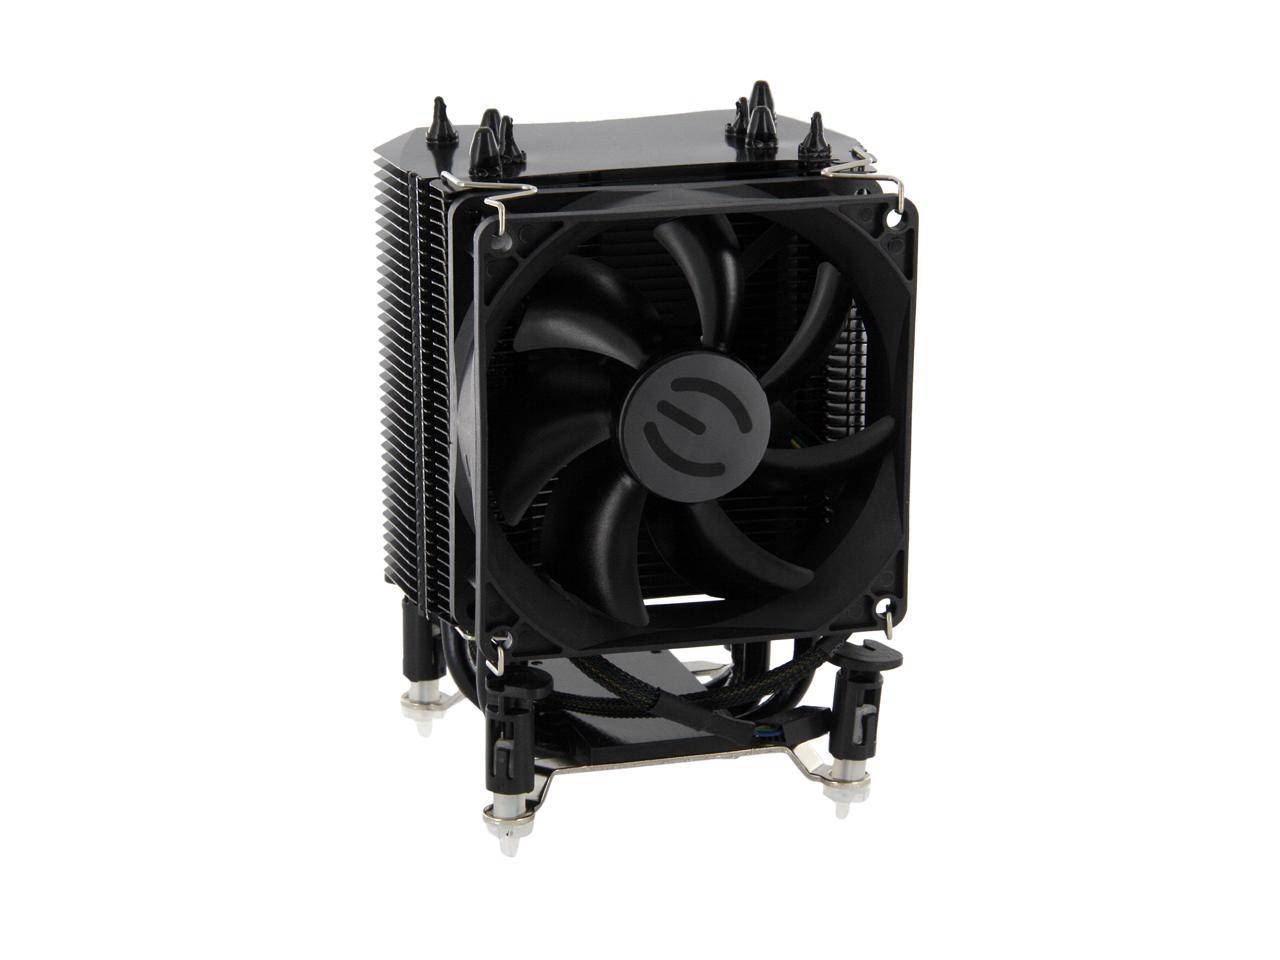 Direct Touch 4 Heat Pipe Sleeve Intel Socket 1150/1155/1156 ACX CPU Cooler 100-FS-C901-KR EVGA mITX 92mm 